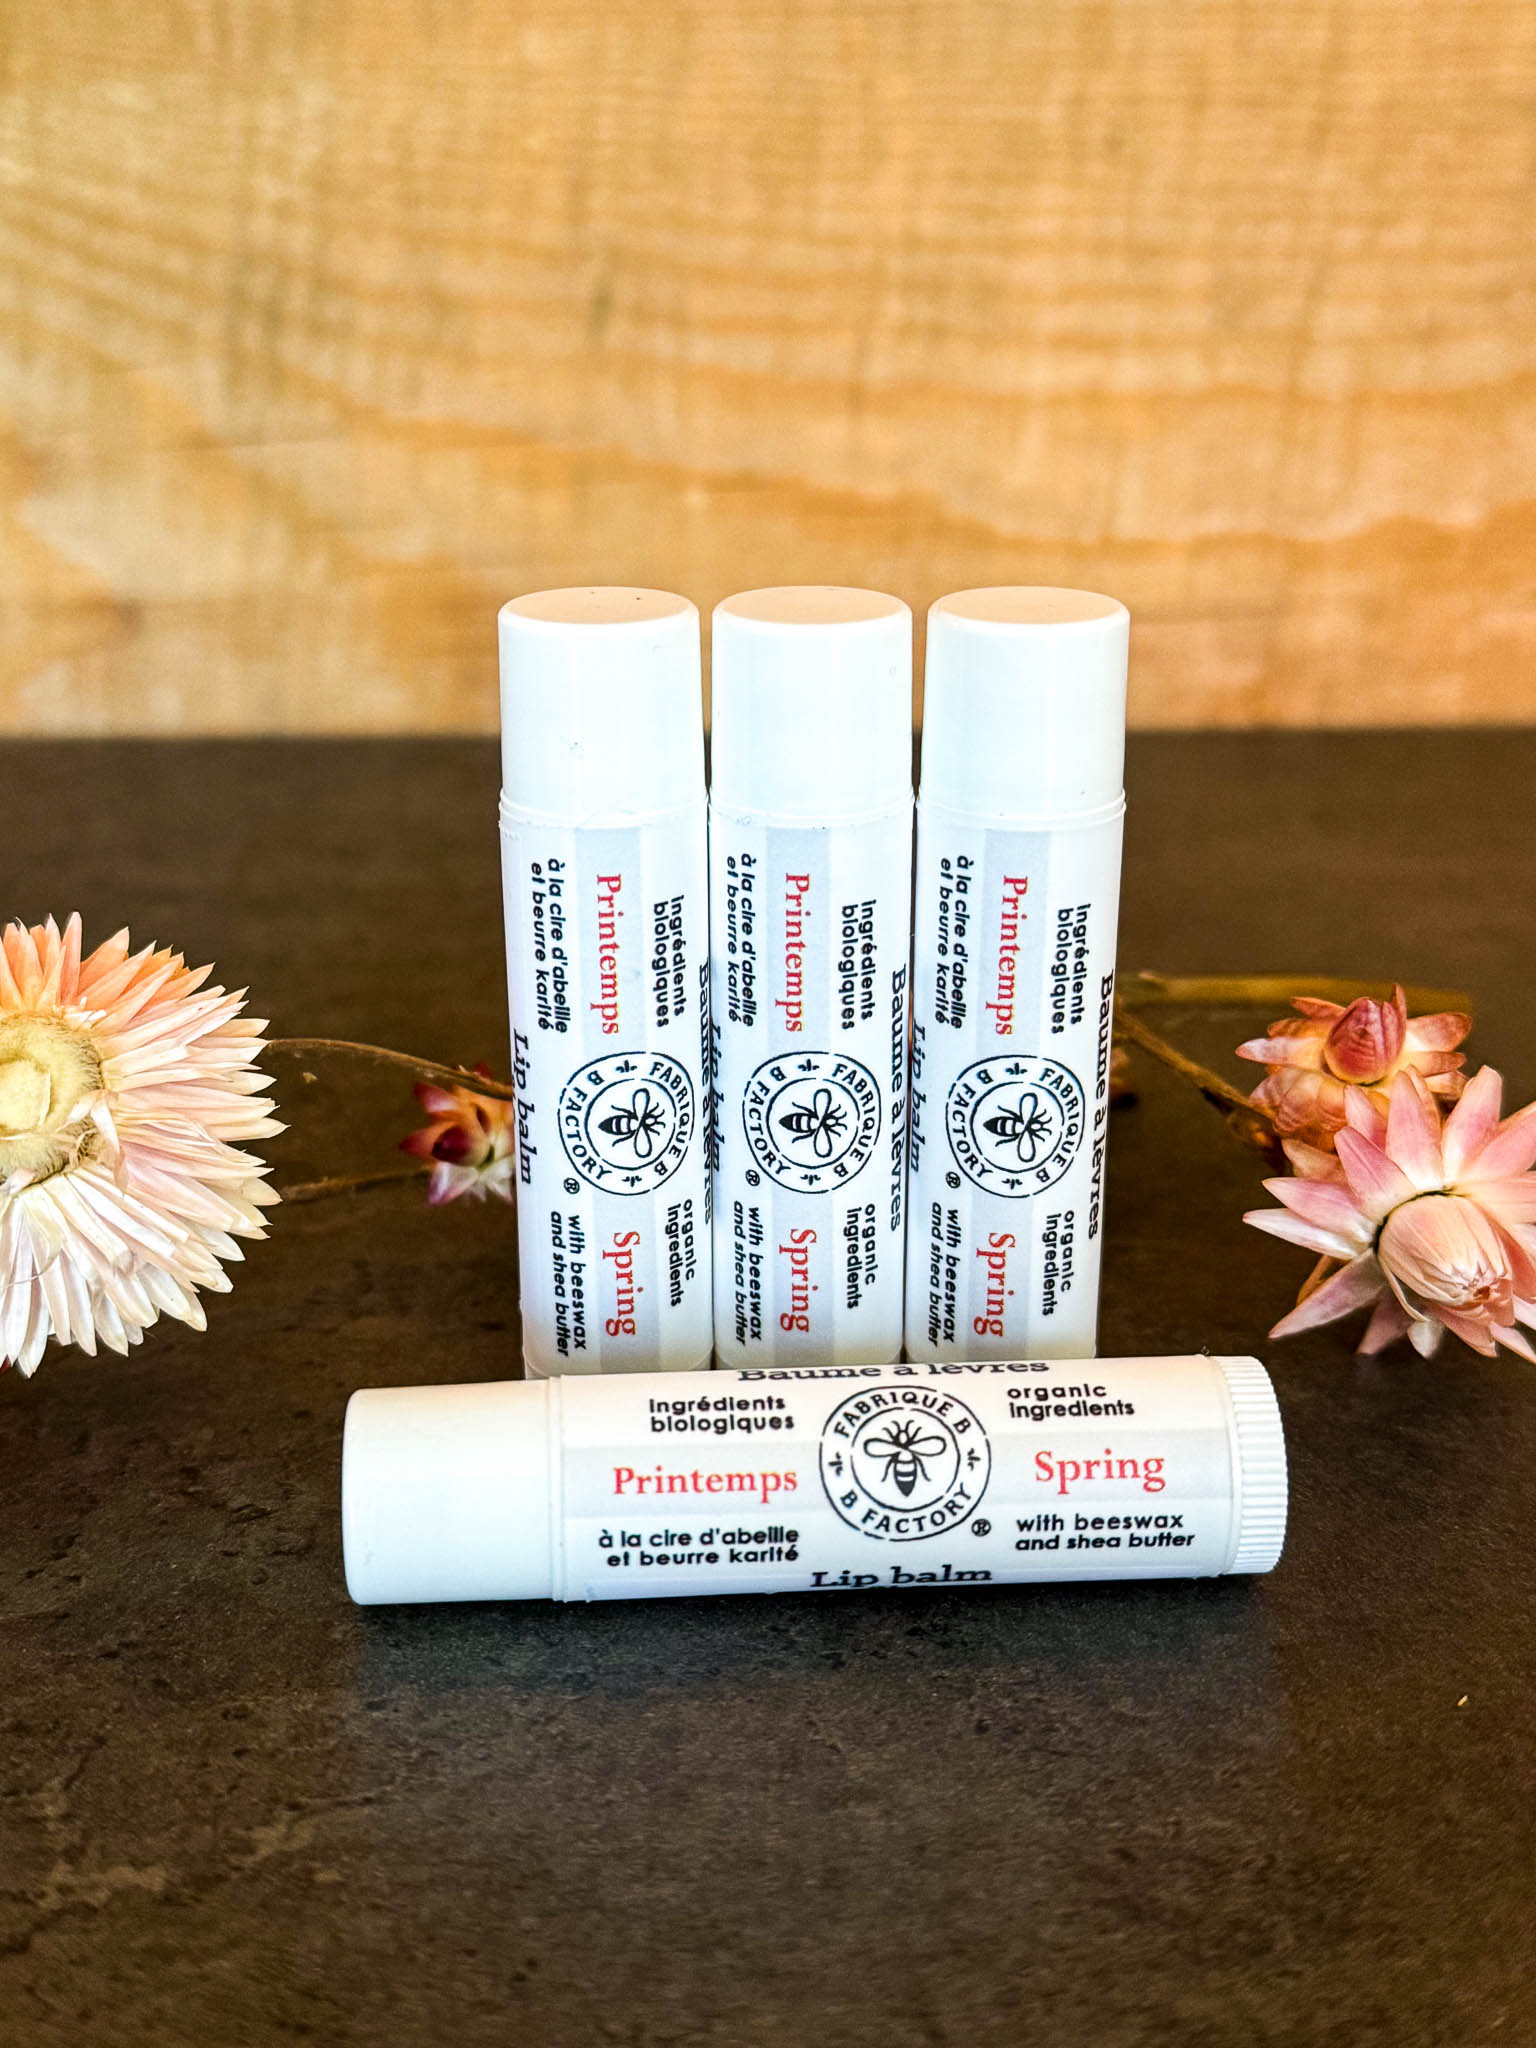 3 "Spring" lip balms by B Factory standing on end, with another lip balm lying in front, on a dark surface with a wood background and some dried flowers on the side